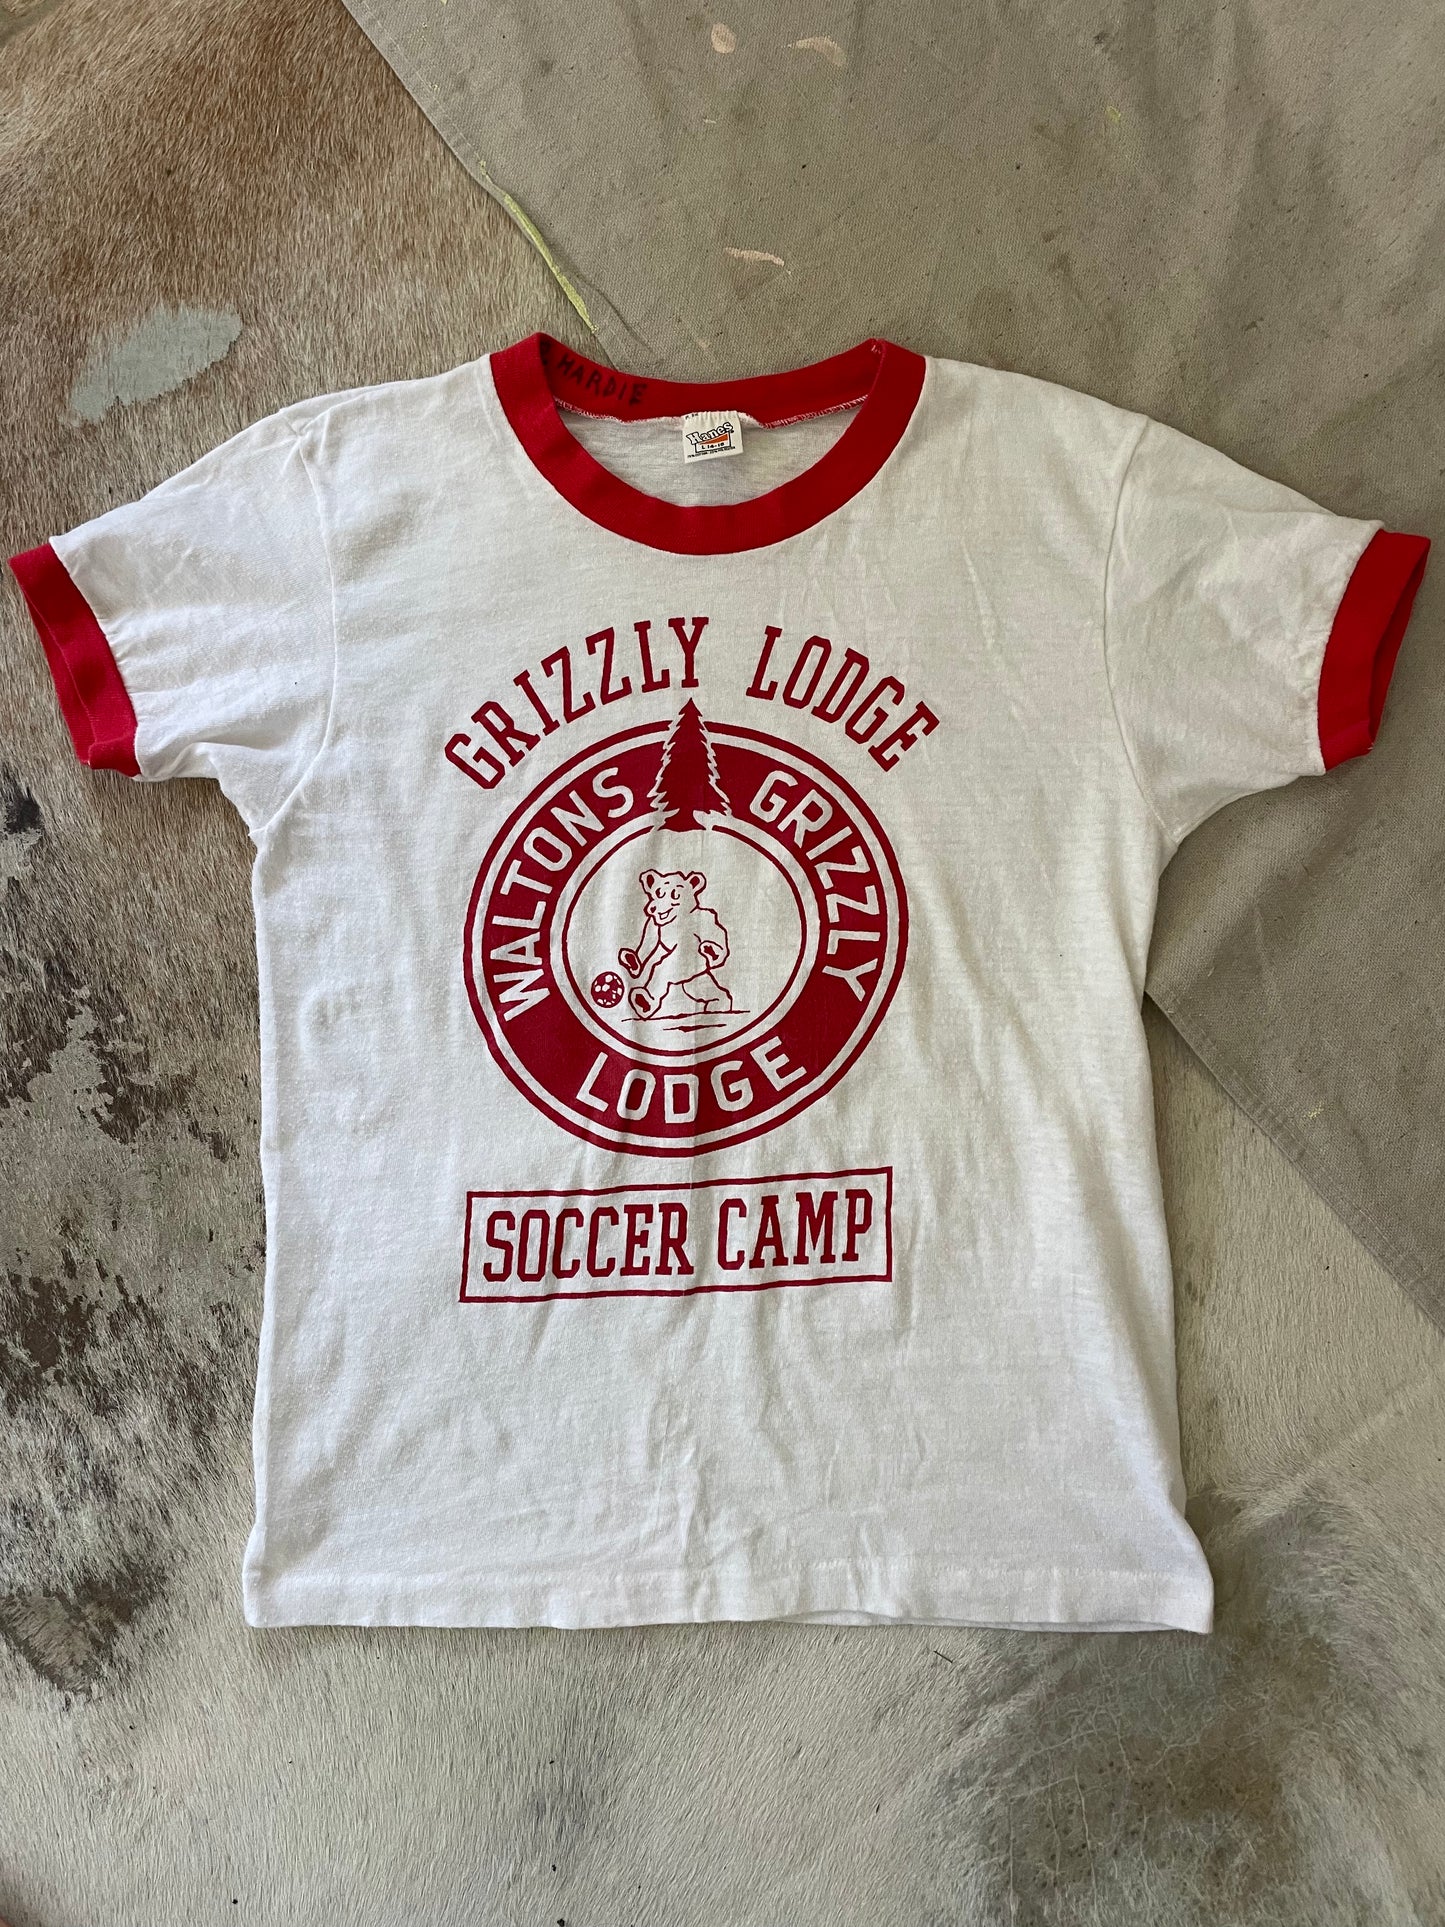 70s Waltons Grizzly Lodge Soccer Camp Ringer Tee